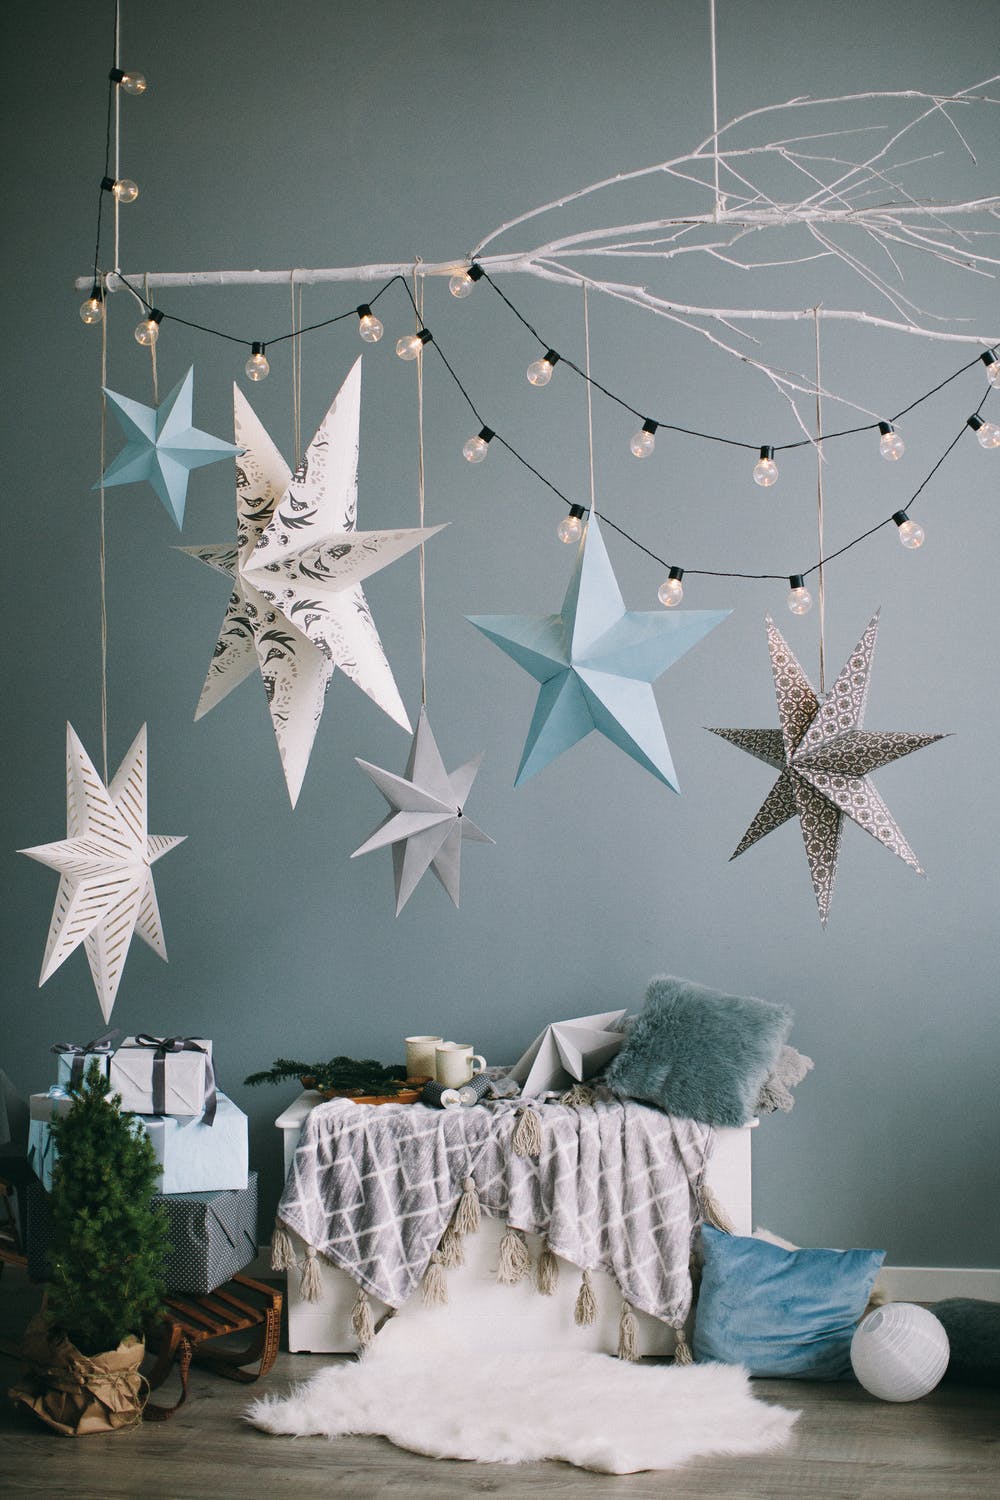 Stars, lights, and pillows next to wall decor.